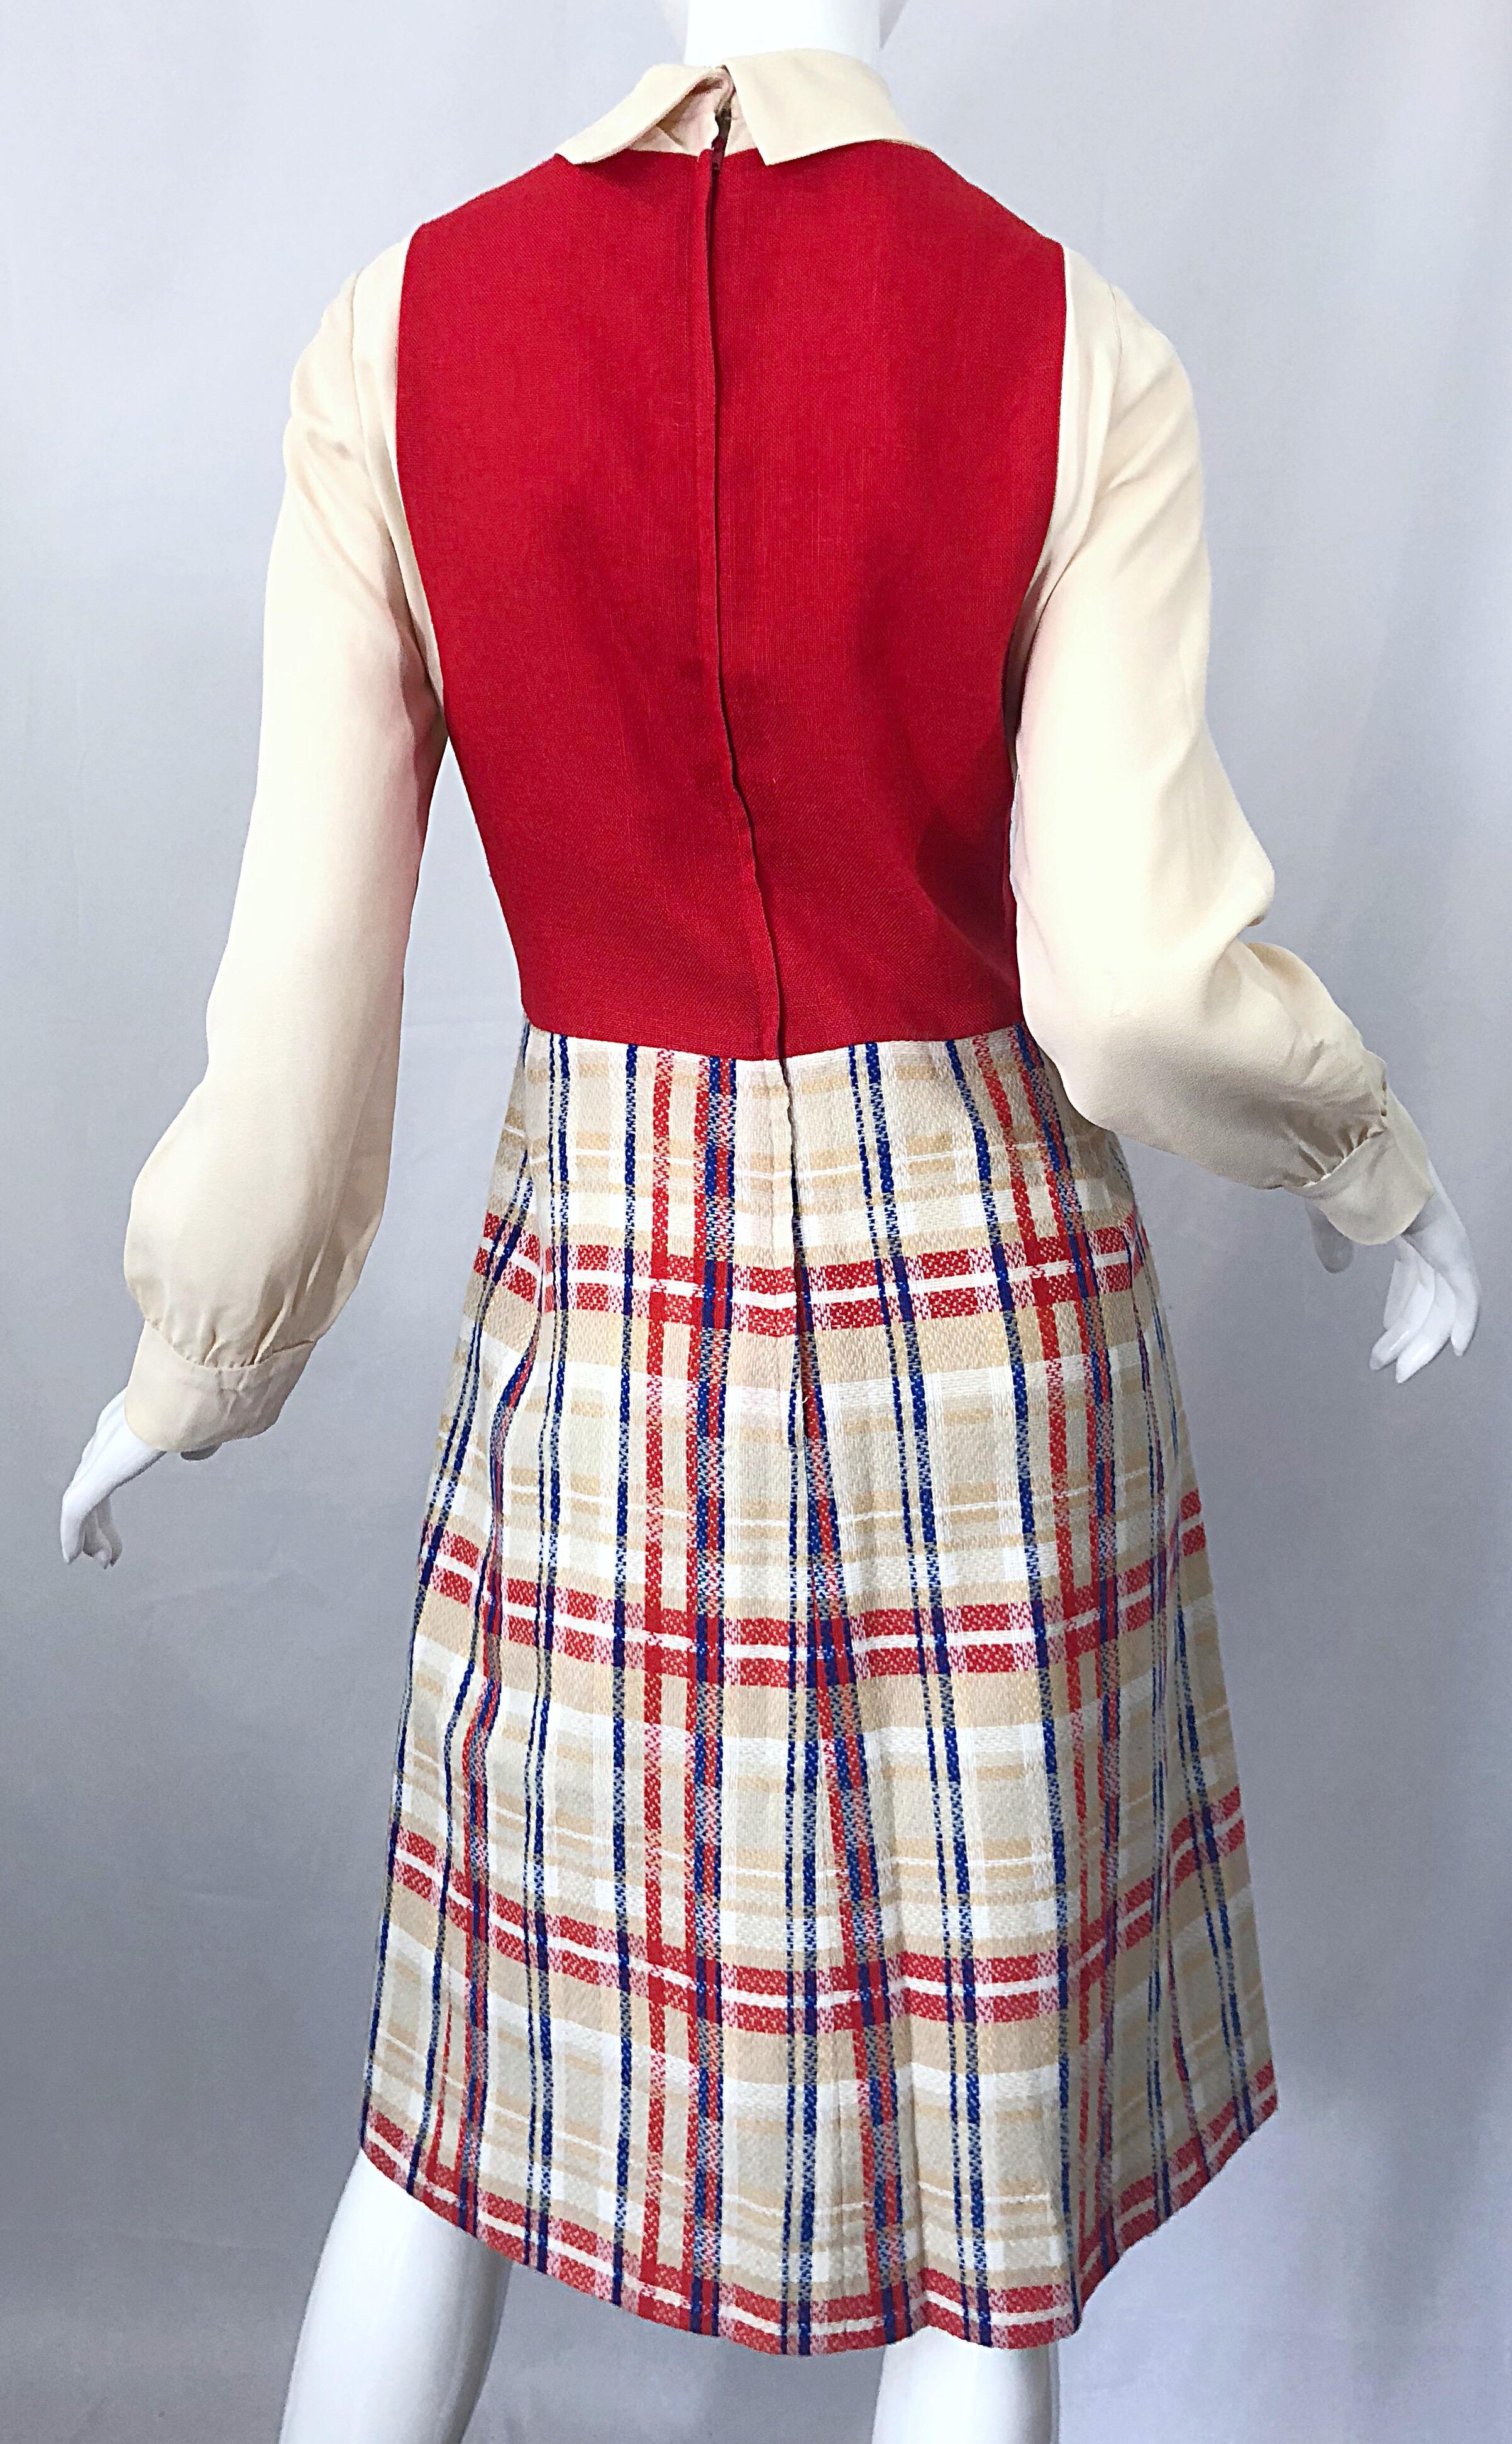 Women's Chic 1960s Pat Sandler Trompe l'Oeil Red White and Blue Vintage 60s A Line Dress For Sale